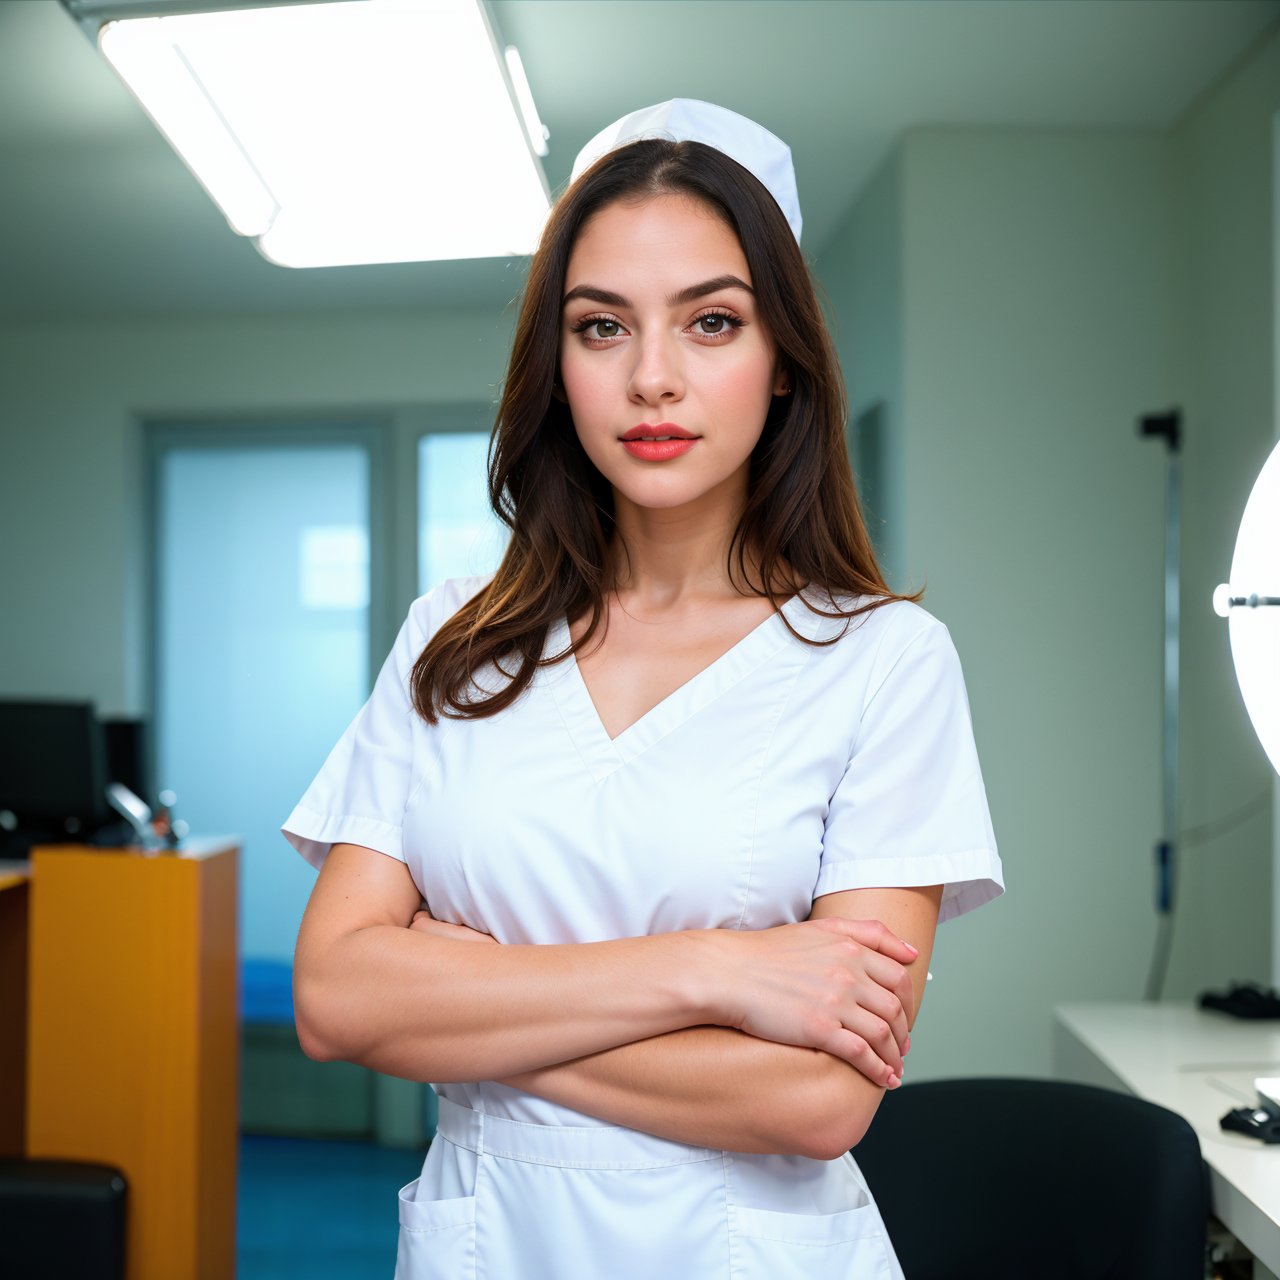 (RAW photo, best quality), (realistic, photo-realistic:1.3), wide angle photo, masterpiece, 1girl, cute, young, (upper body:1.3), realistic face, standing, studio lighting
in hospital operating room, surgical gloves, medical equipment, anesthesia machine
(((White))) nurse uniform smooth, nurse, nurse hat, stethoscope  Dr. She